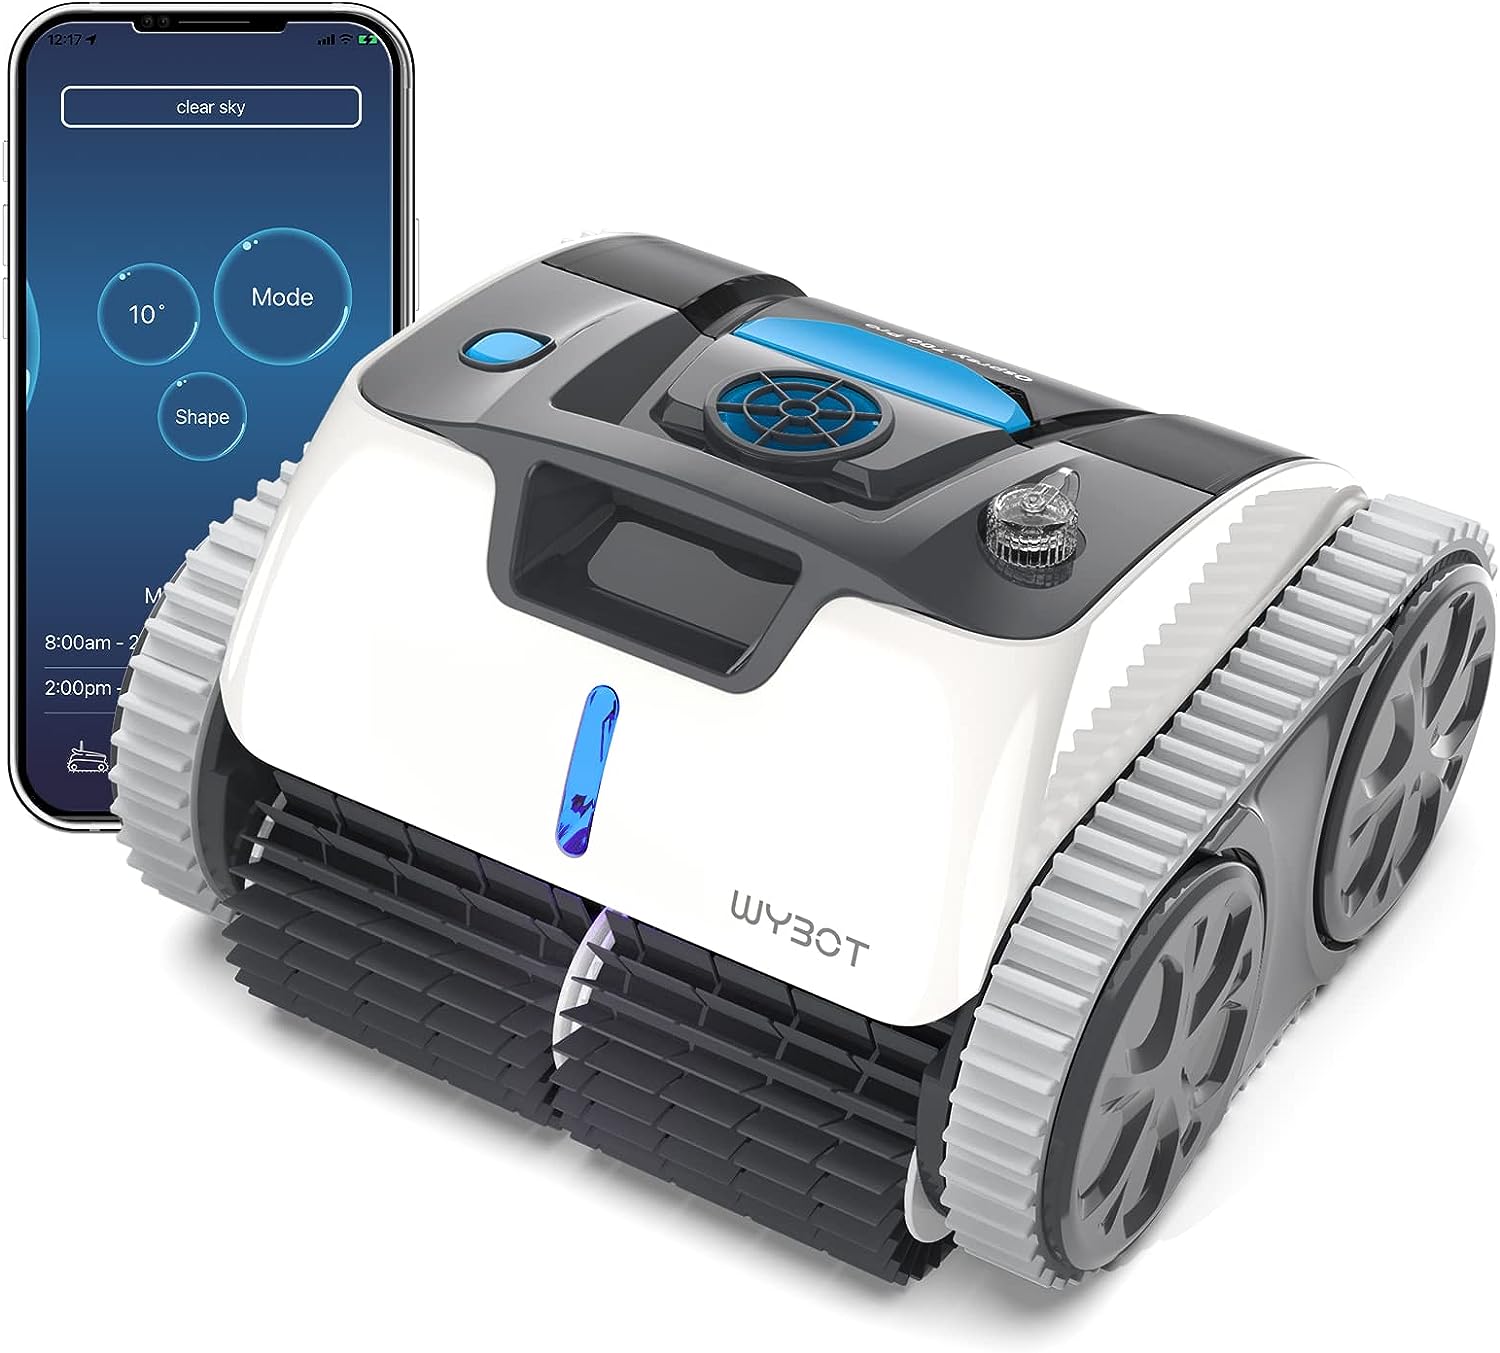 WYBOT Wall Climbing Robotic Pool Cleaner Review